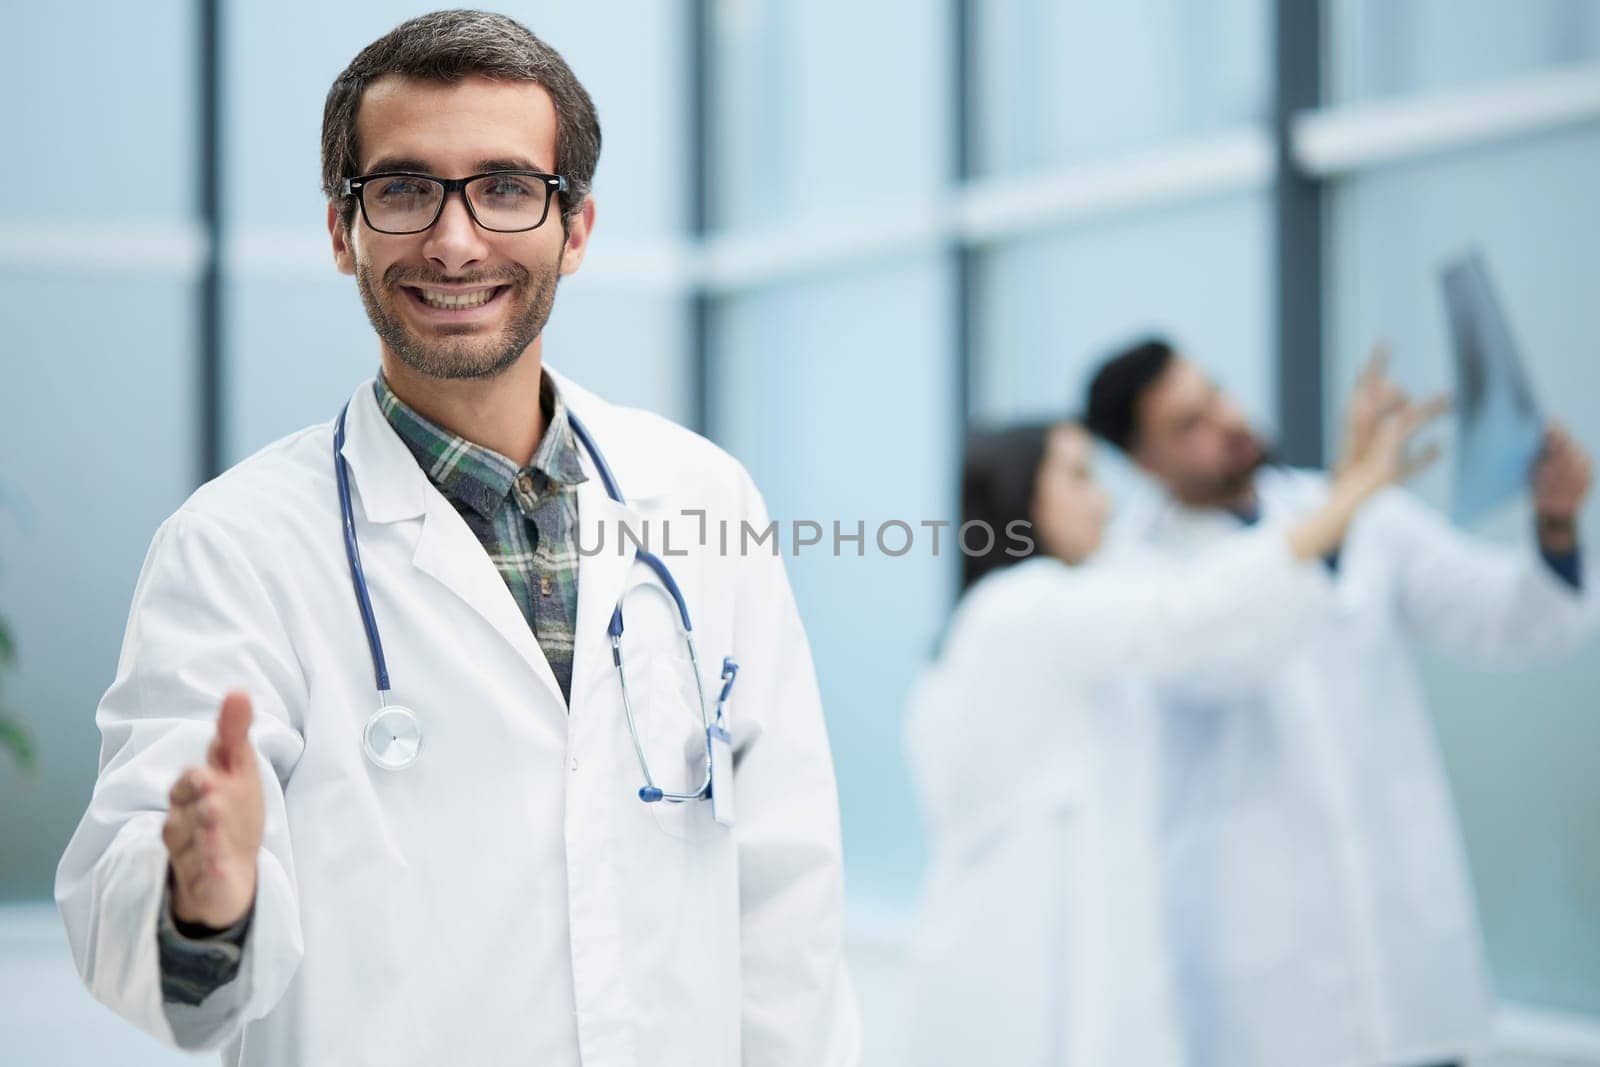 image of a doctor extending his hand in greeting against the background of his colleagues